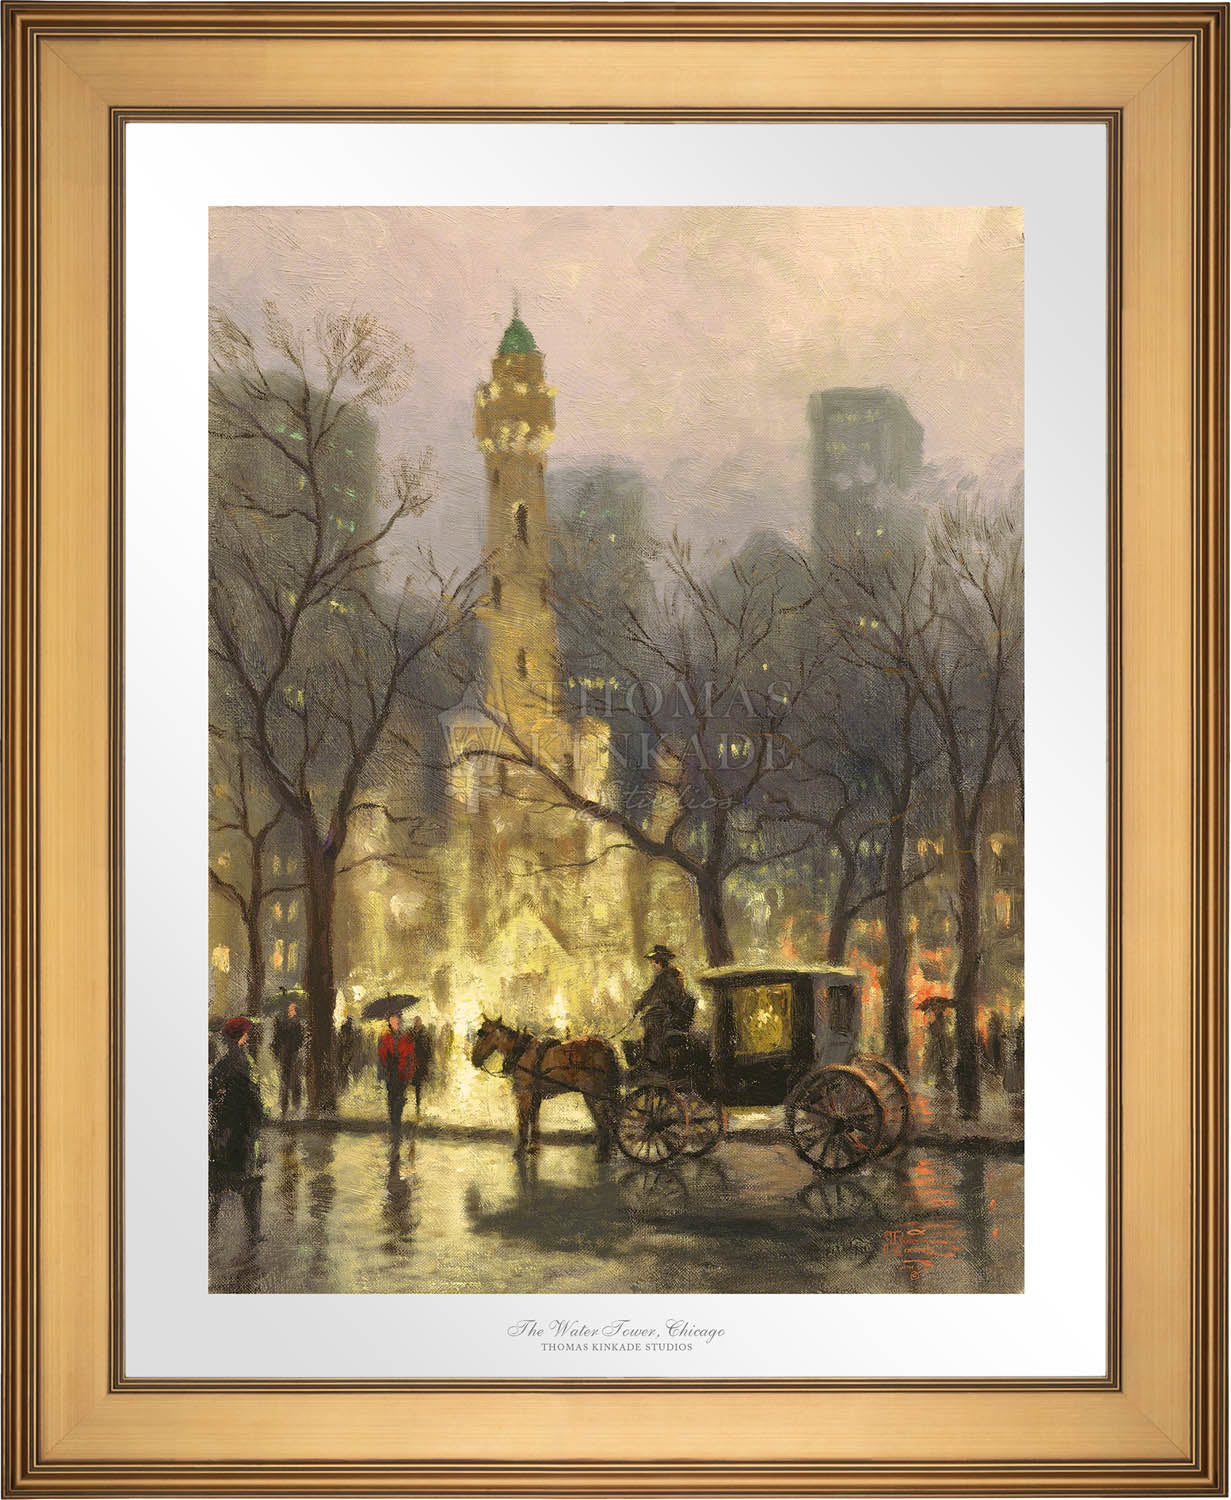 72/150A/P 真作 The Water Tower Chicago by Thomas Kinkade トーマスキンケード 未使用 現地品 名品 希少 証明書付き 絵画 12×16 額付き